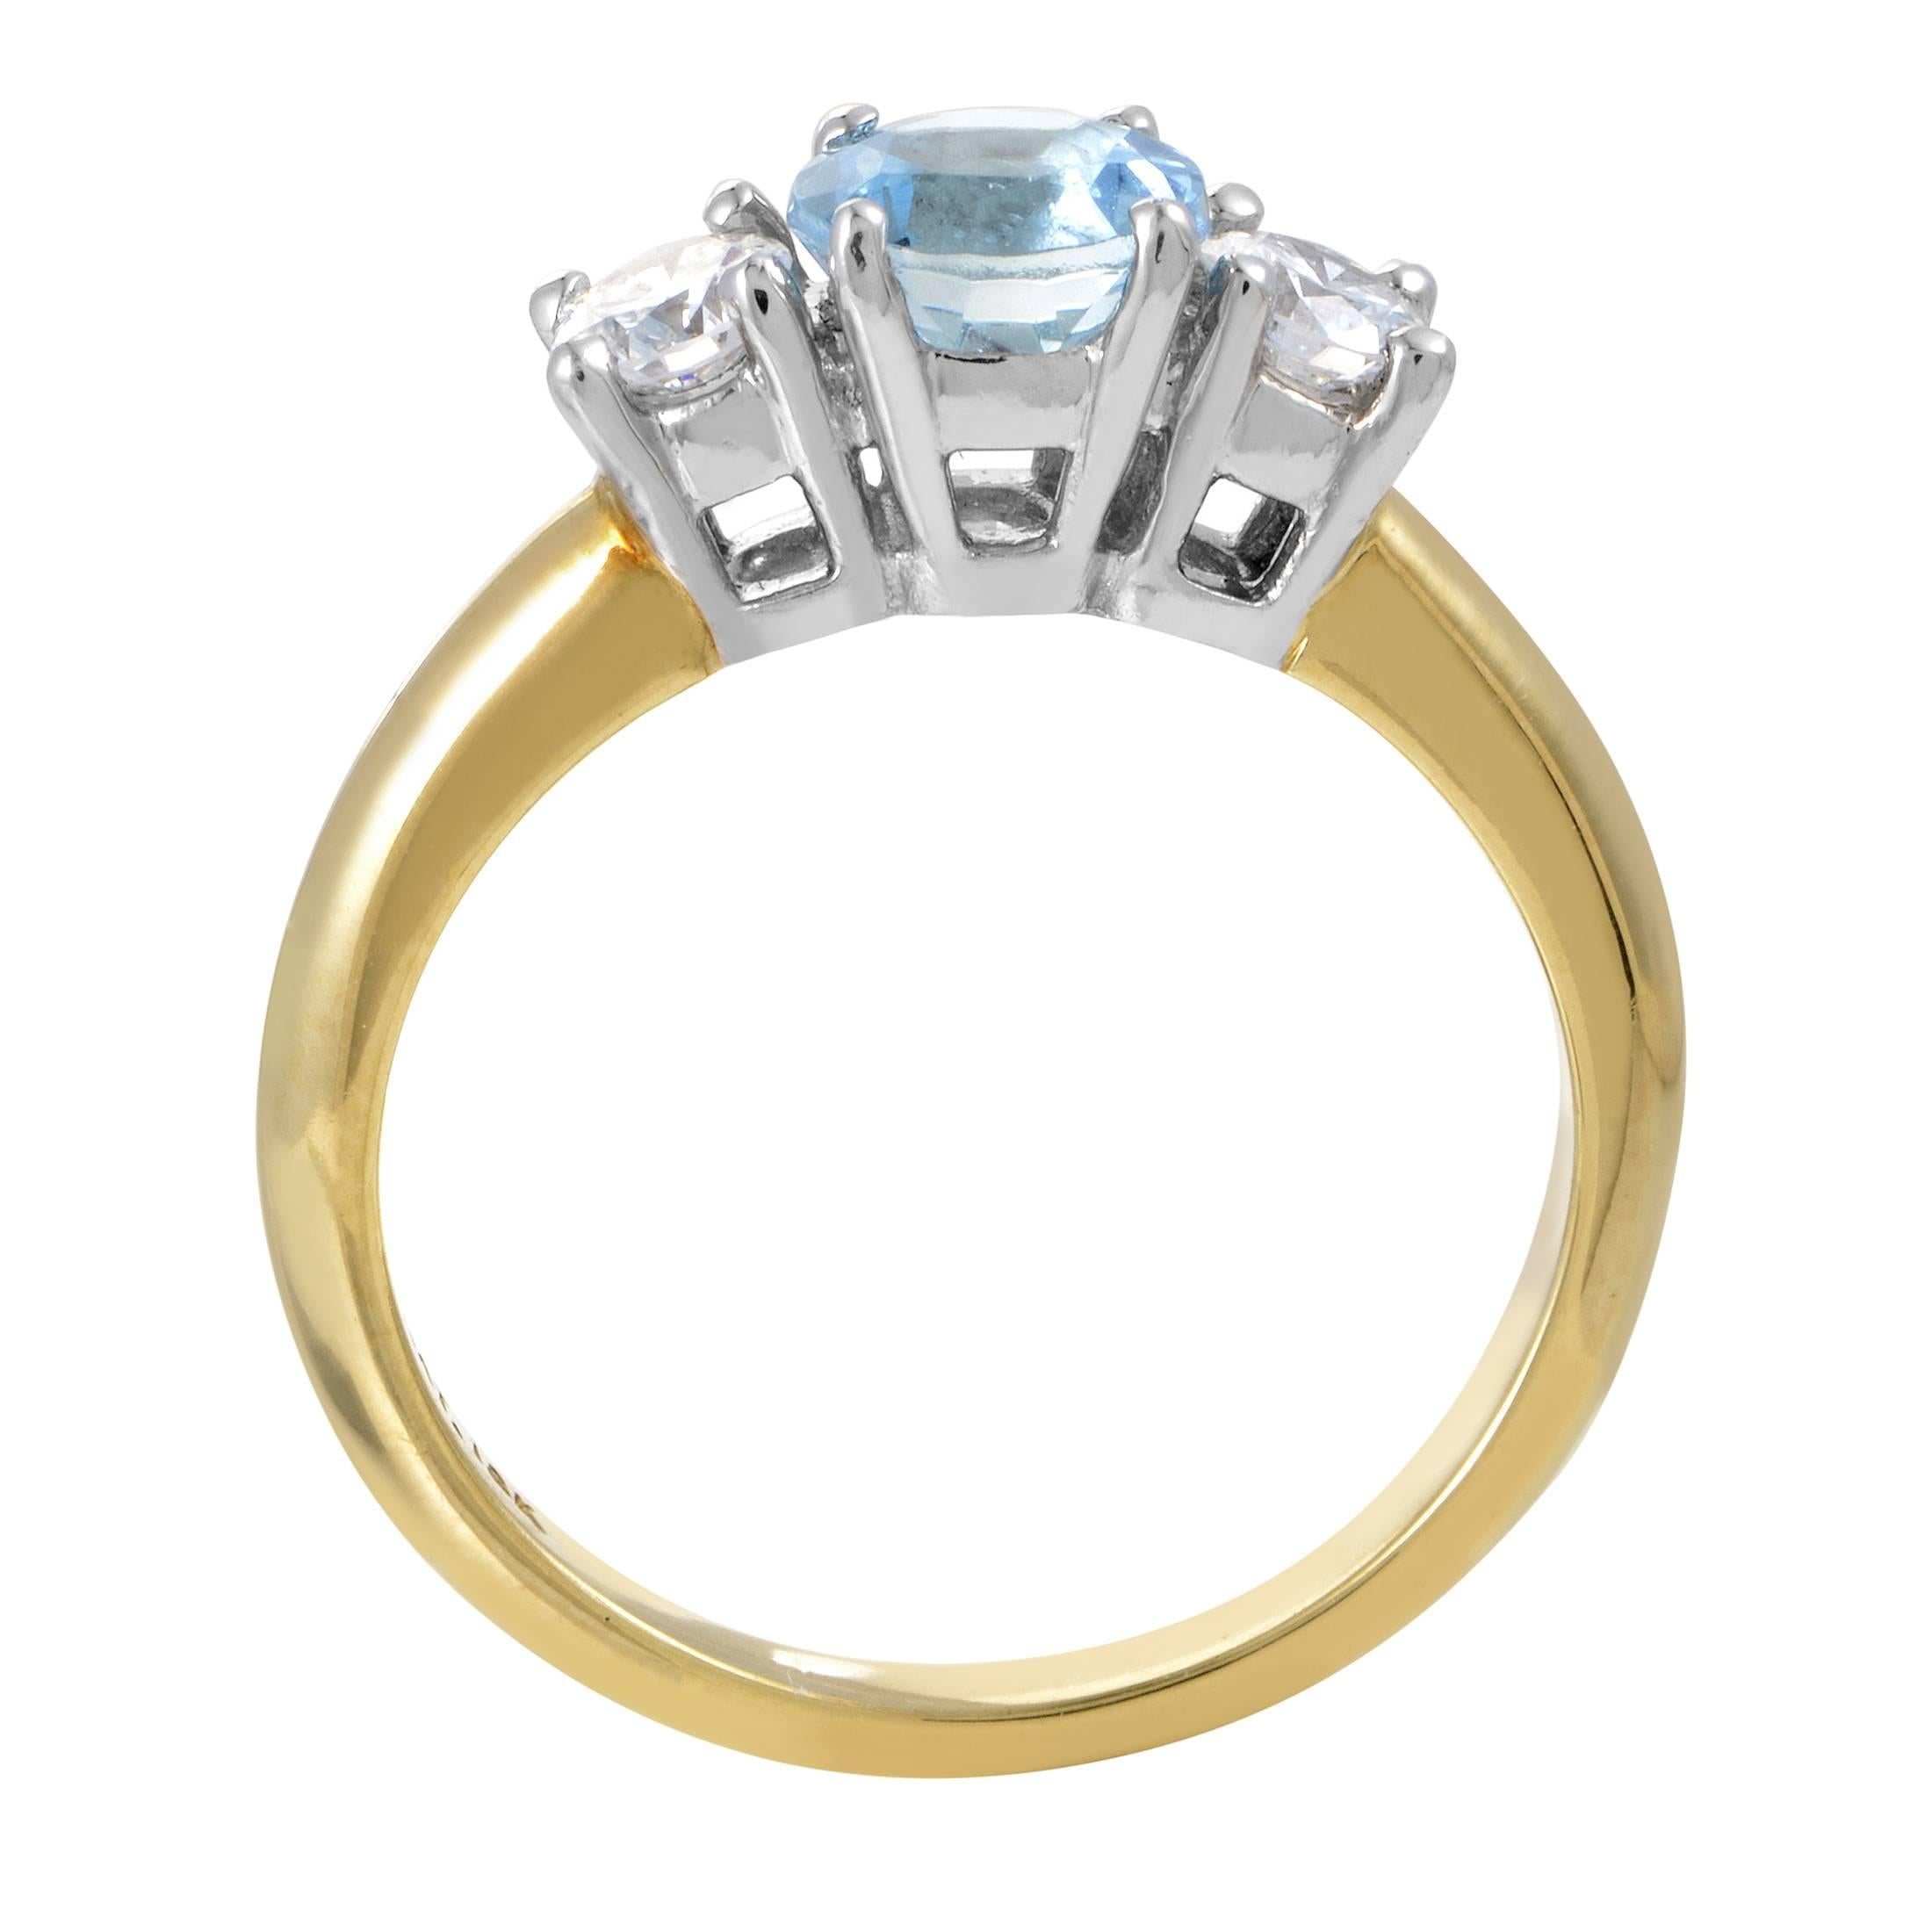 Provided tasteful contrast and excellent emphasis by the warm backdrop of radiant 18K yellow gold, the stunning aquamarine and lustrous diamonds amounting to 0.35ct are set upon gleaming platinum in this remarkable engagement ring from Tiffany &